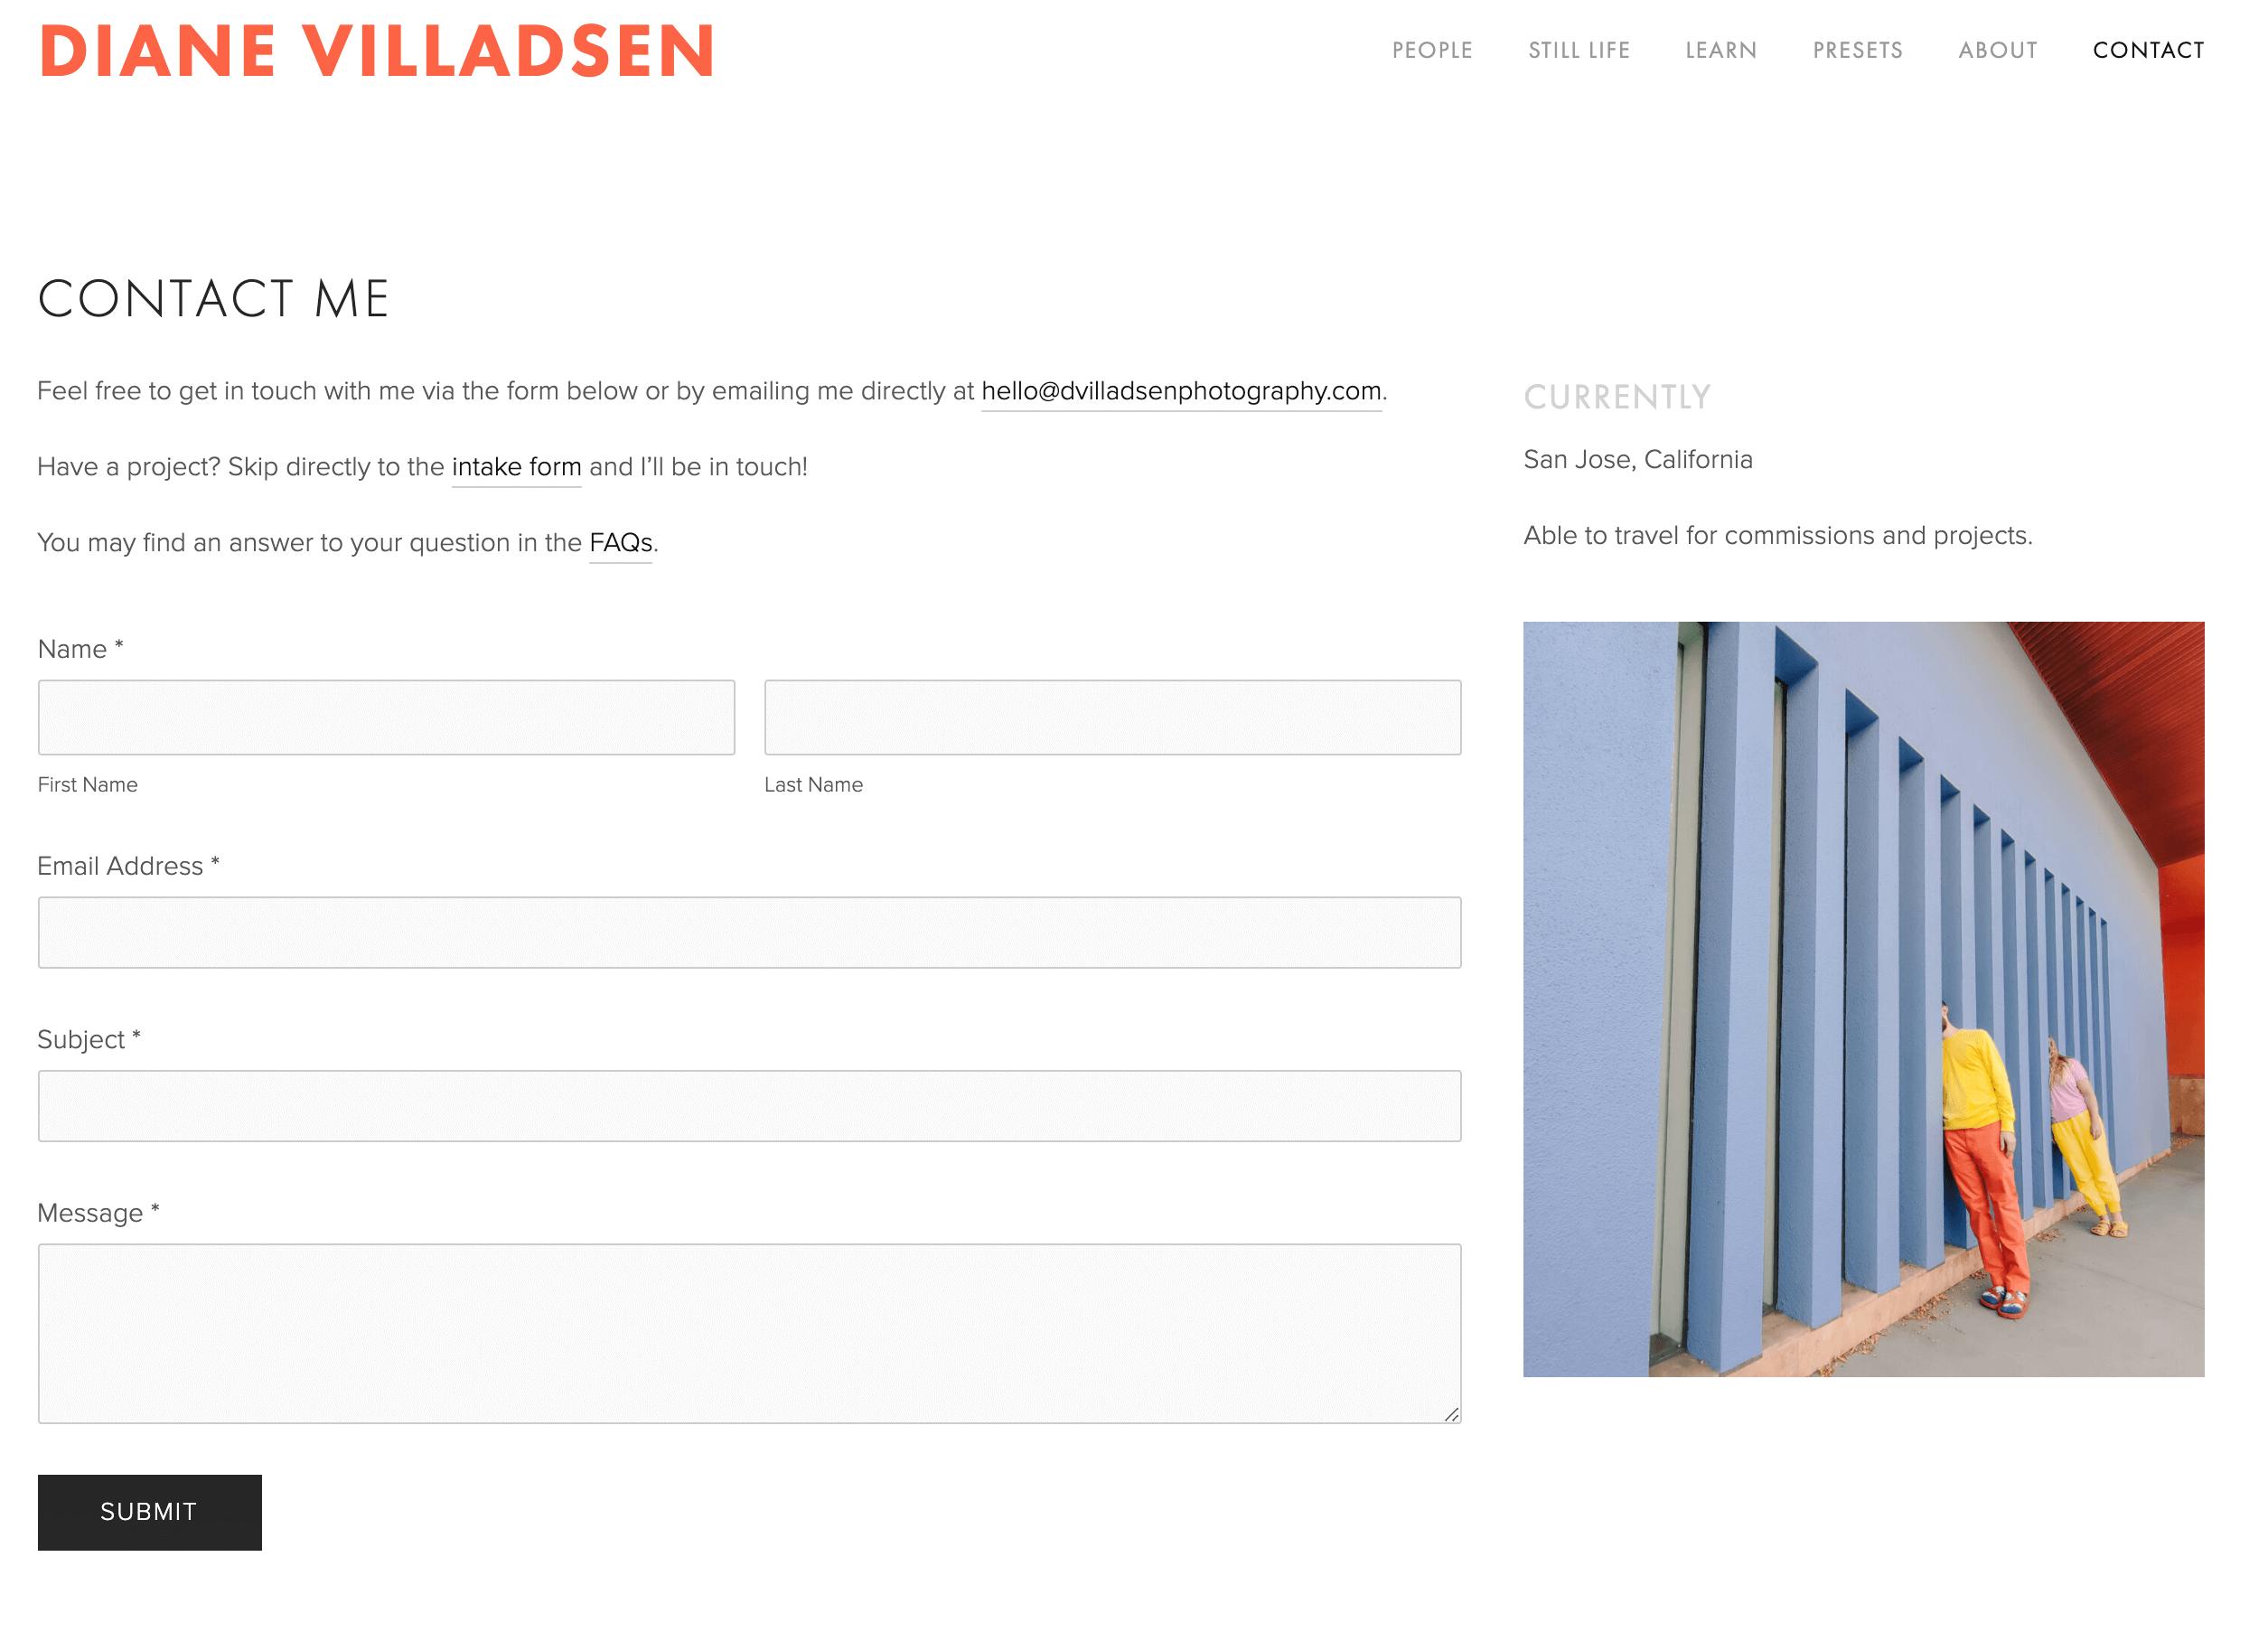 Photographer Diane Villadsen's contat page, featuring a contact form and photo of two models in bright colored outfits hiding their heads behind columns